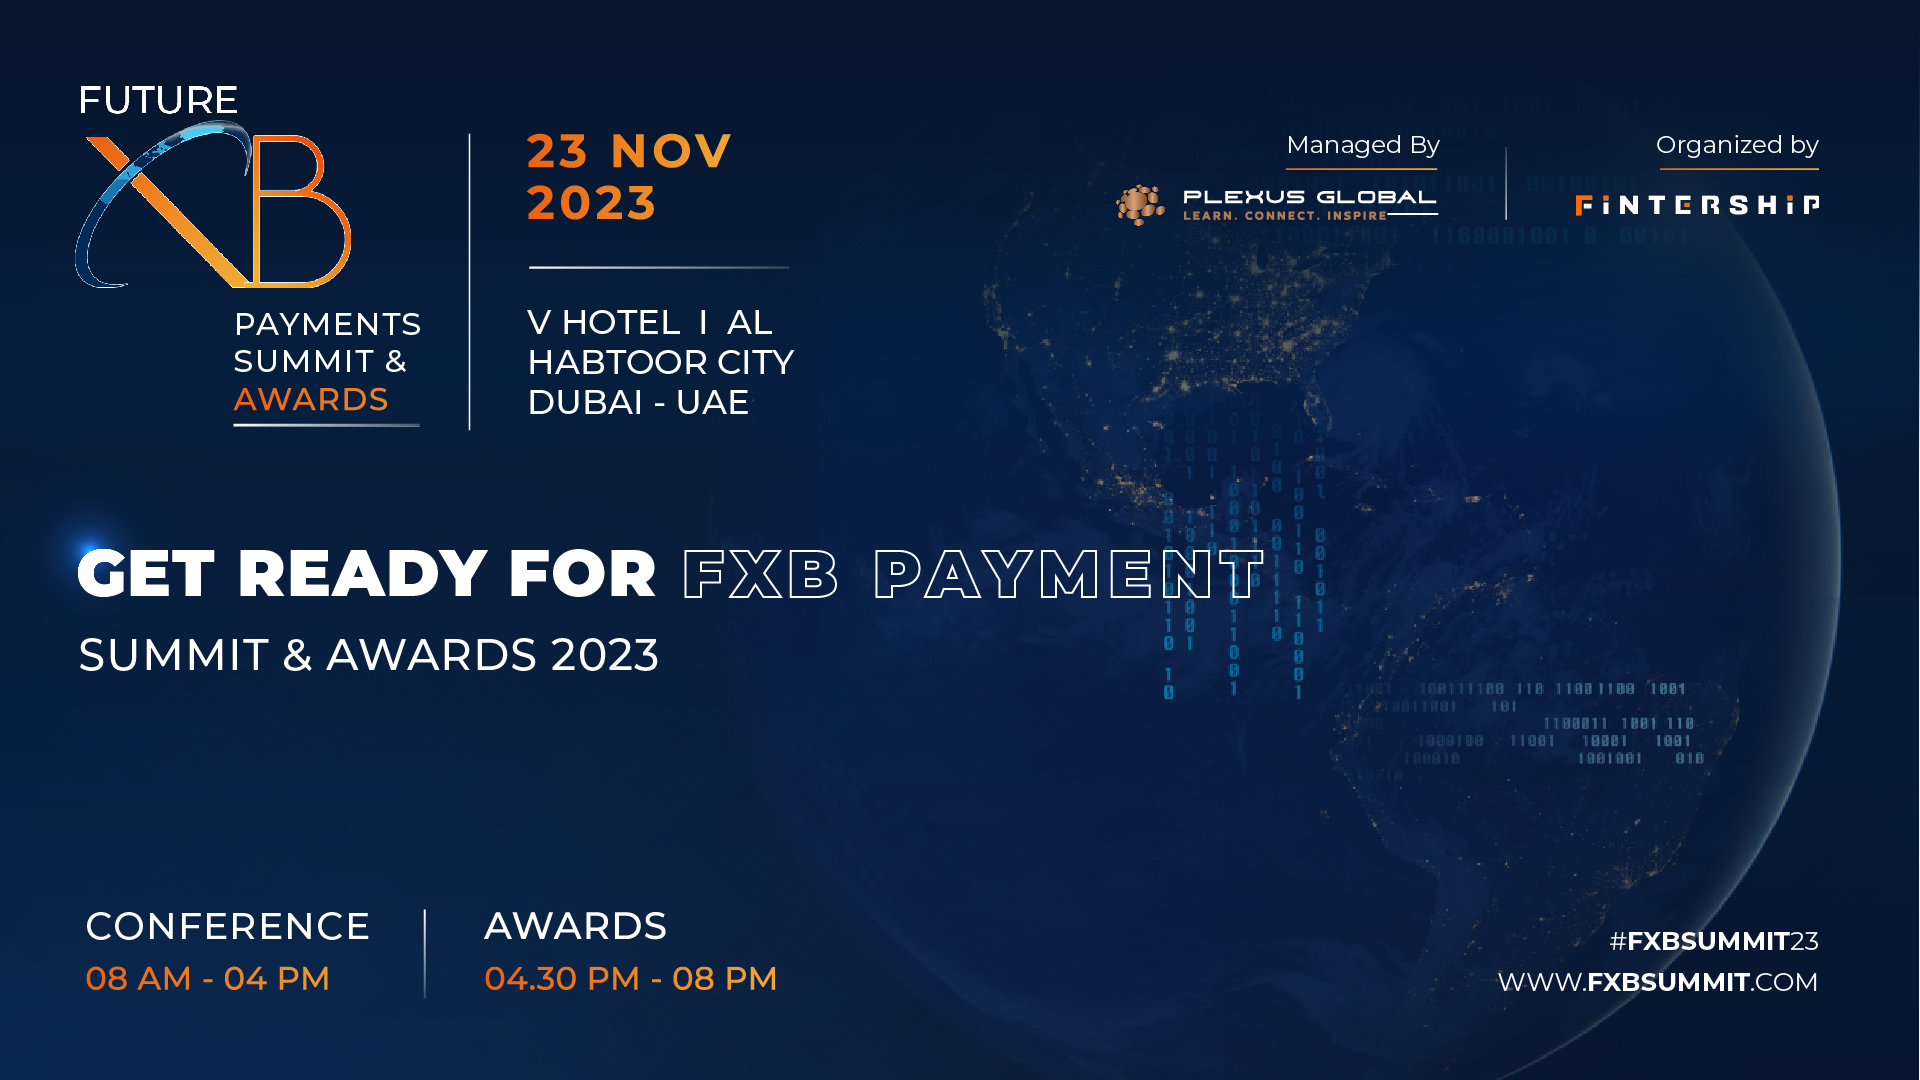 The FXB Payments Summit 2023